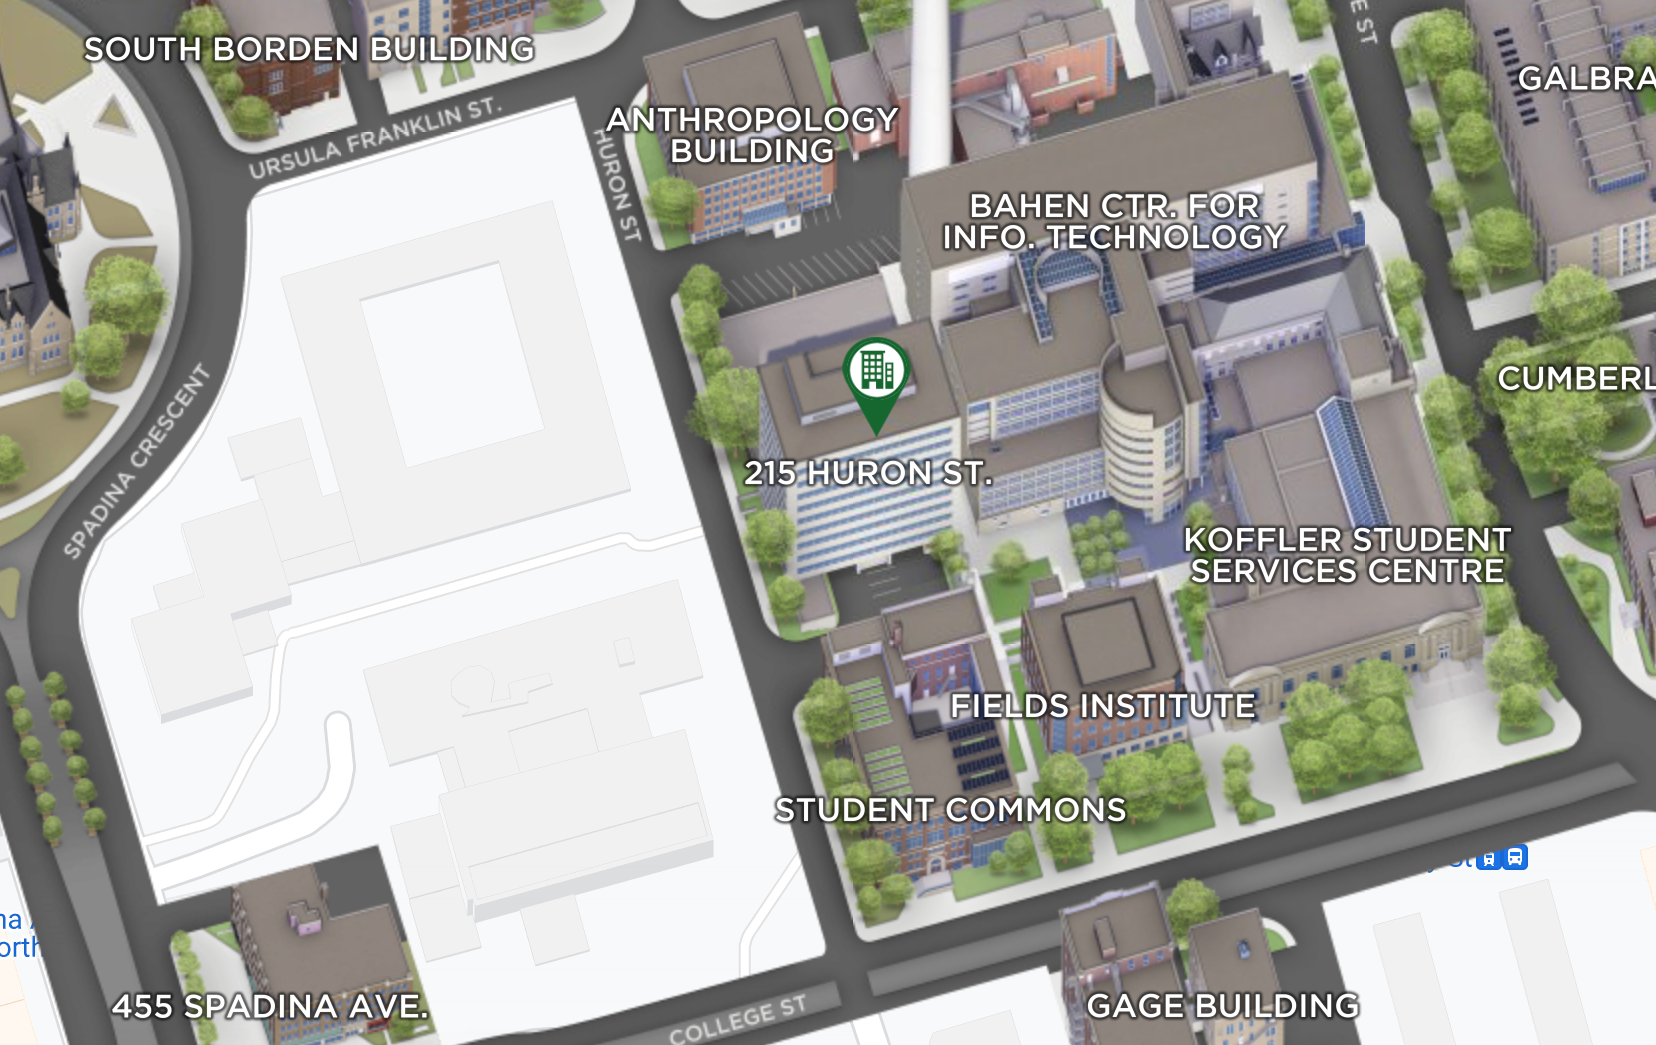 Click on the image to get to the campus map